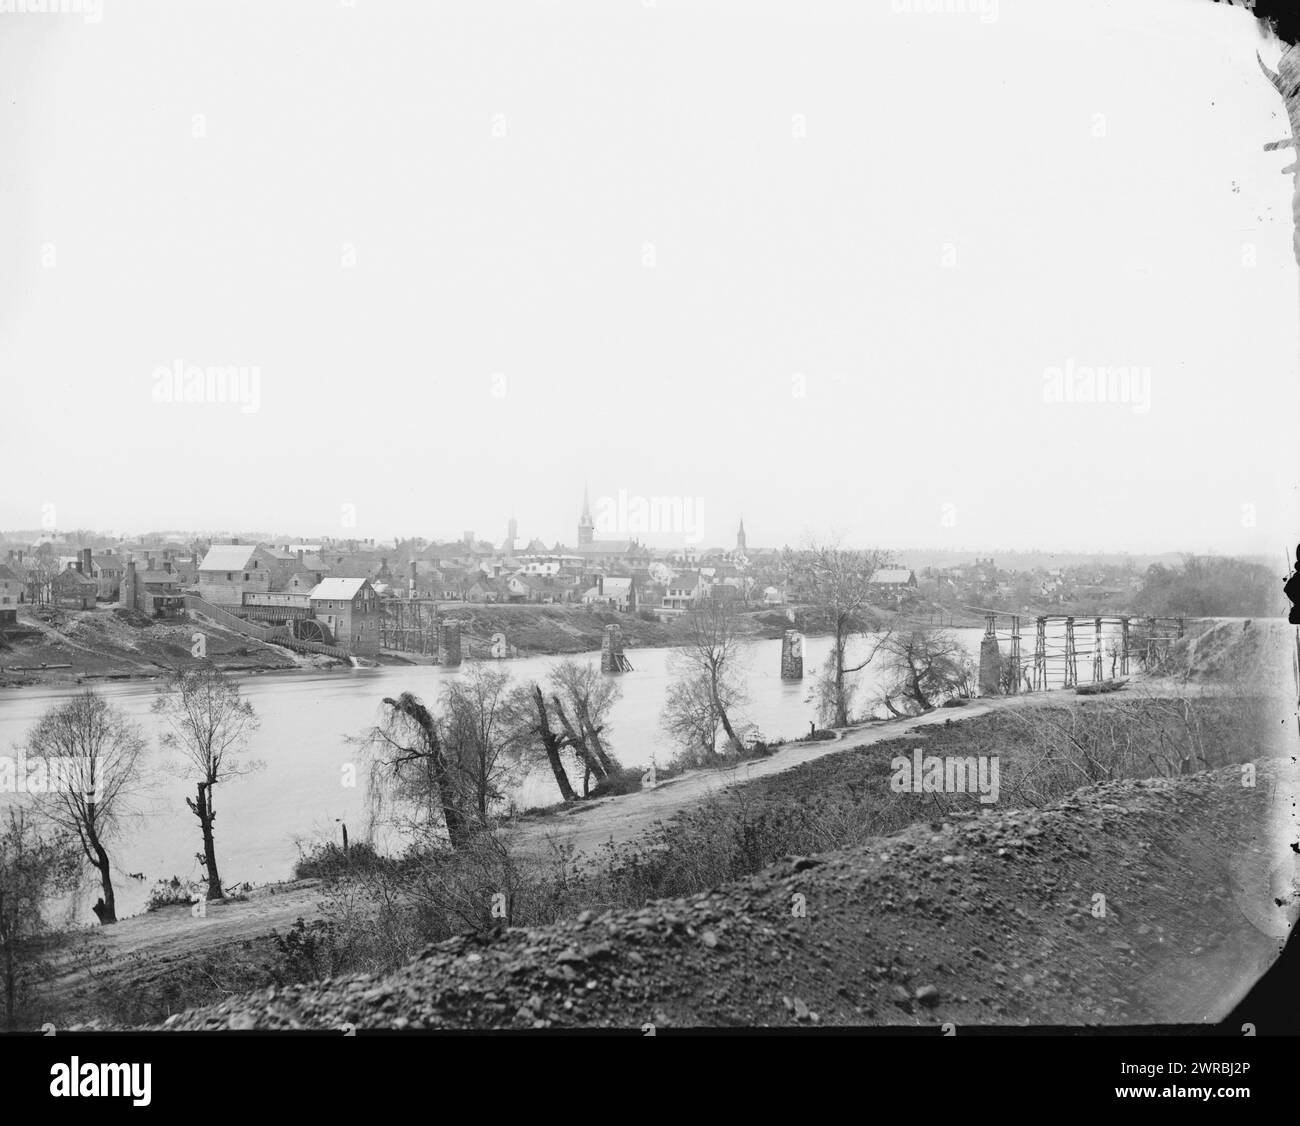 Fredericksburg, Virginia. View of town from east bank of the Rappahannock, O'Sullivan, Timothy H., 1840-1882, photographer, 1863 Mar., United States, History, Civil War, 1861-1865, Glass negatives, 1860-1870, Stereographs, 1860-1870, 1 negative: glass, stereograph, wet collodion, 4 x 10 in Stock Photo